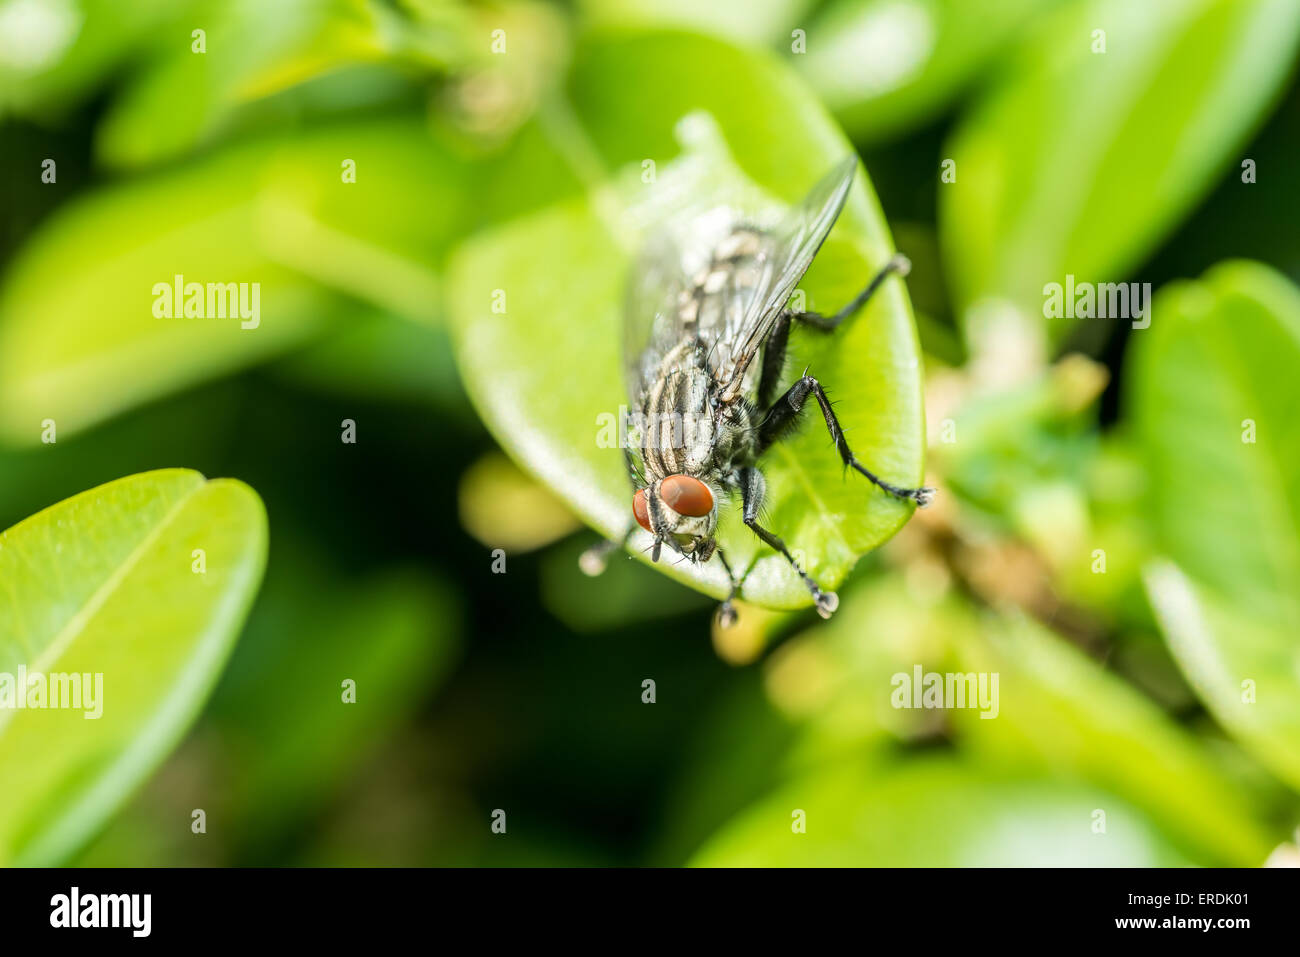 Common Housefly Macro On Green Leaves Background Stock Photo